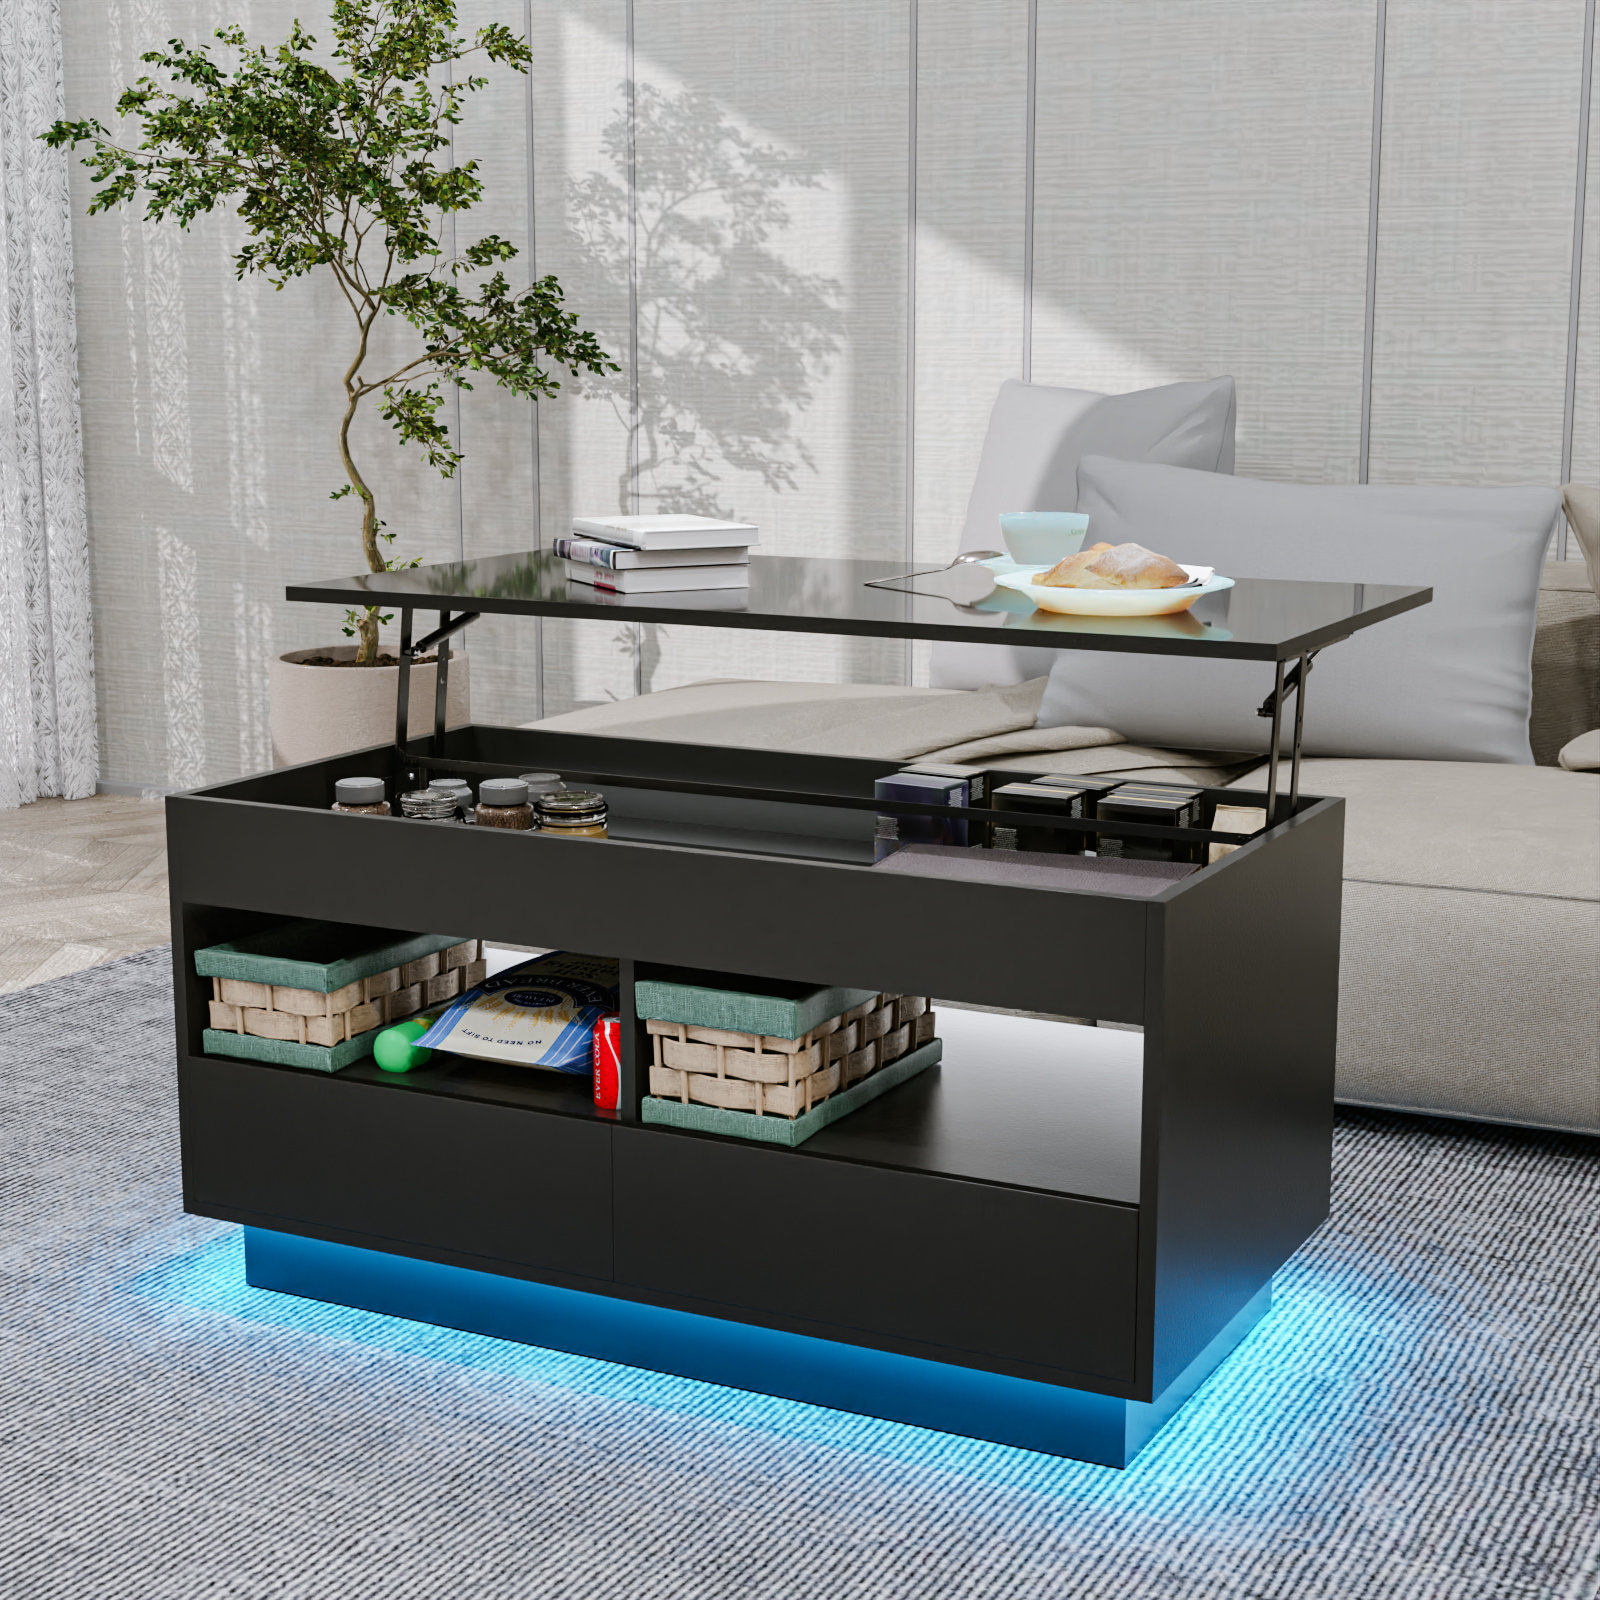 Work Concept Convertible Hidden Desk With Storage - The Lounge Furniture